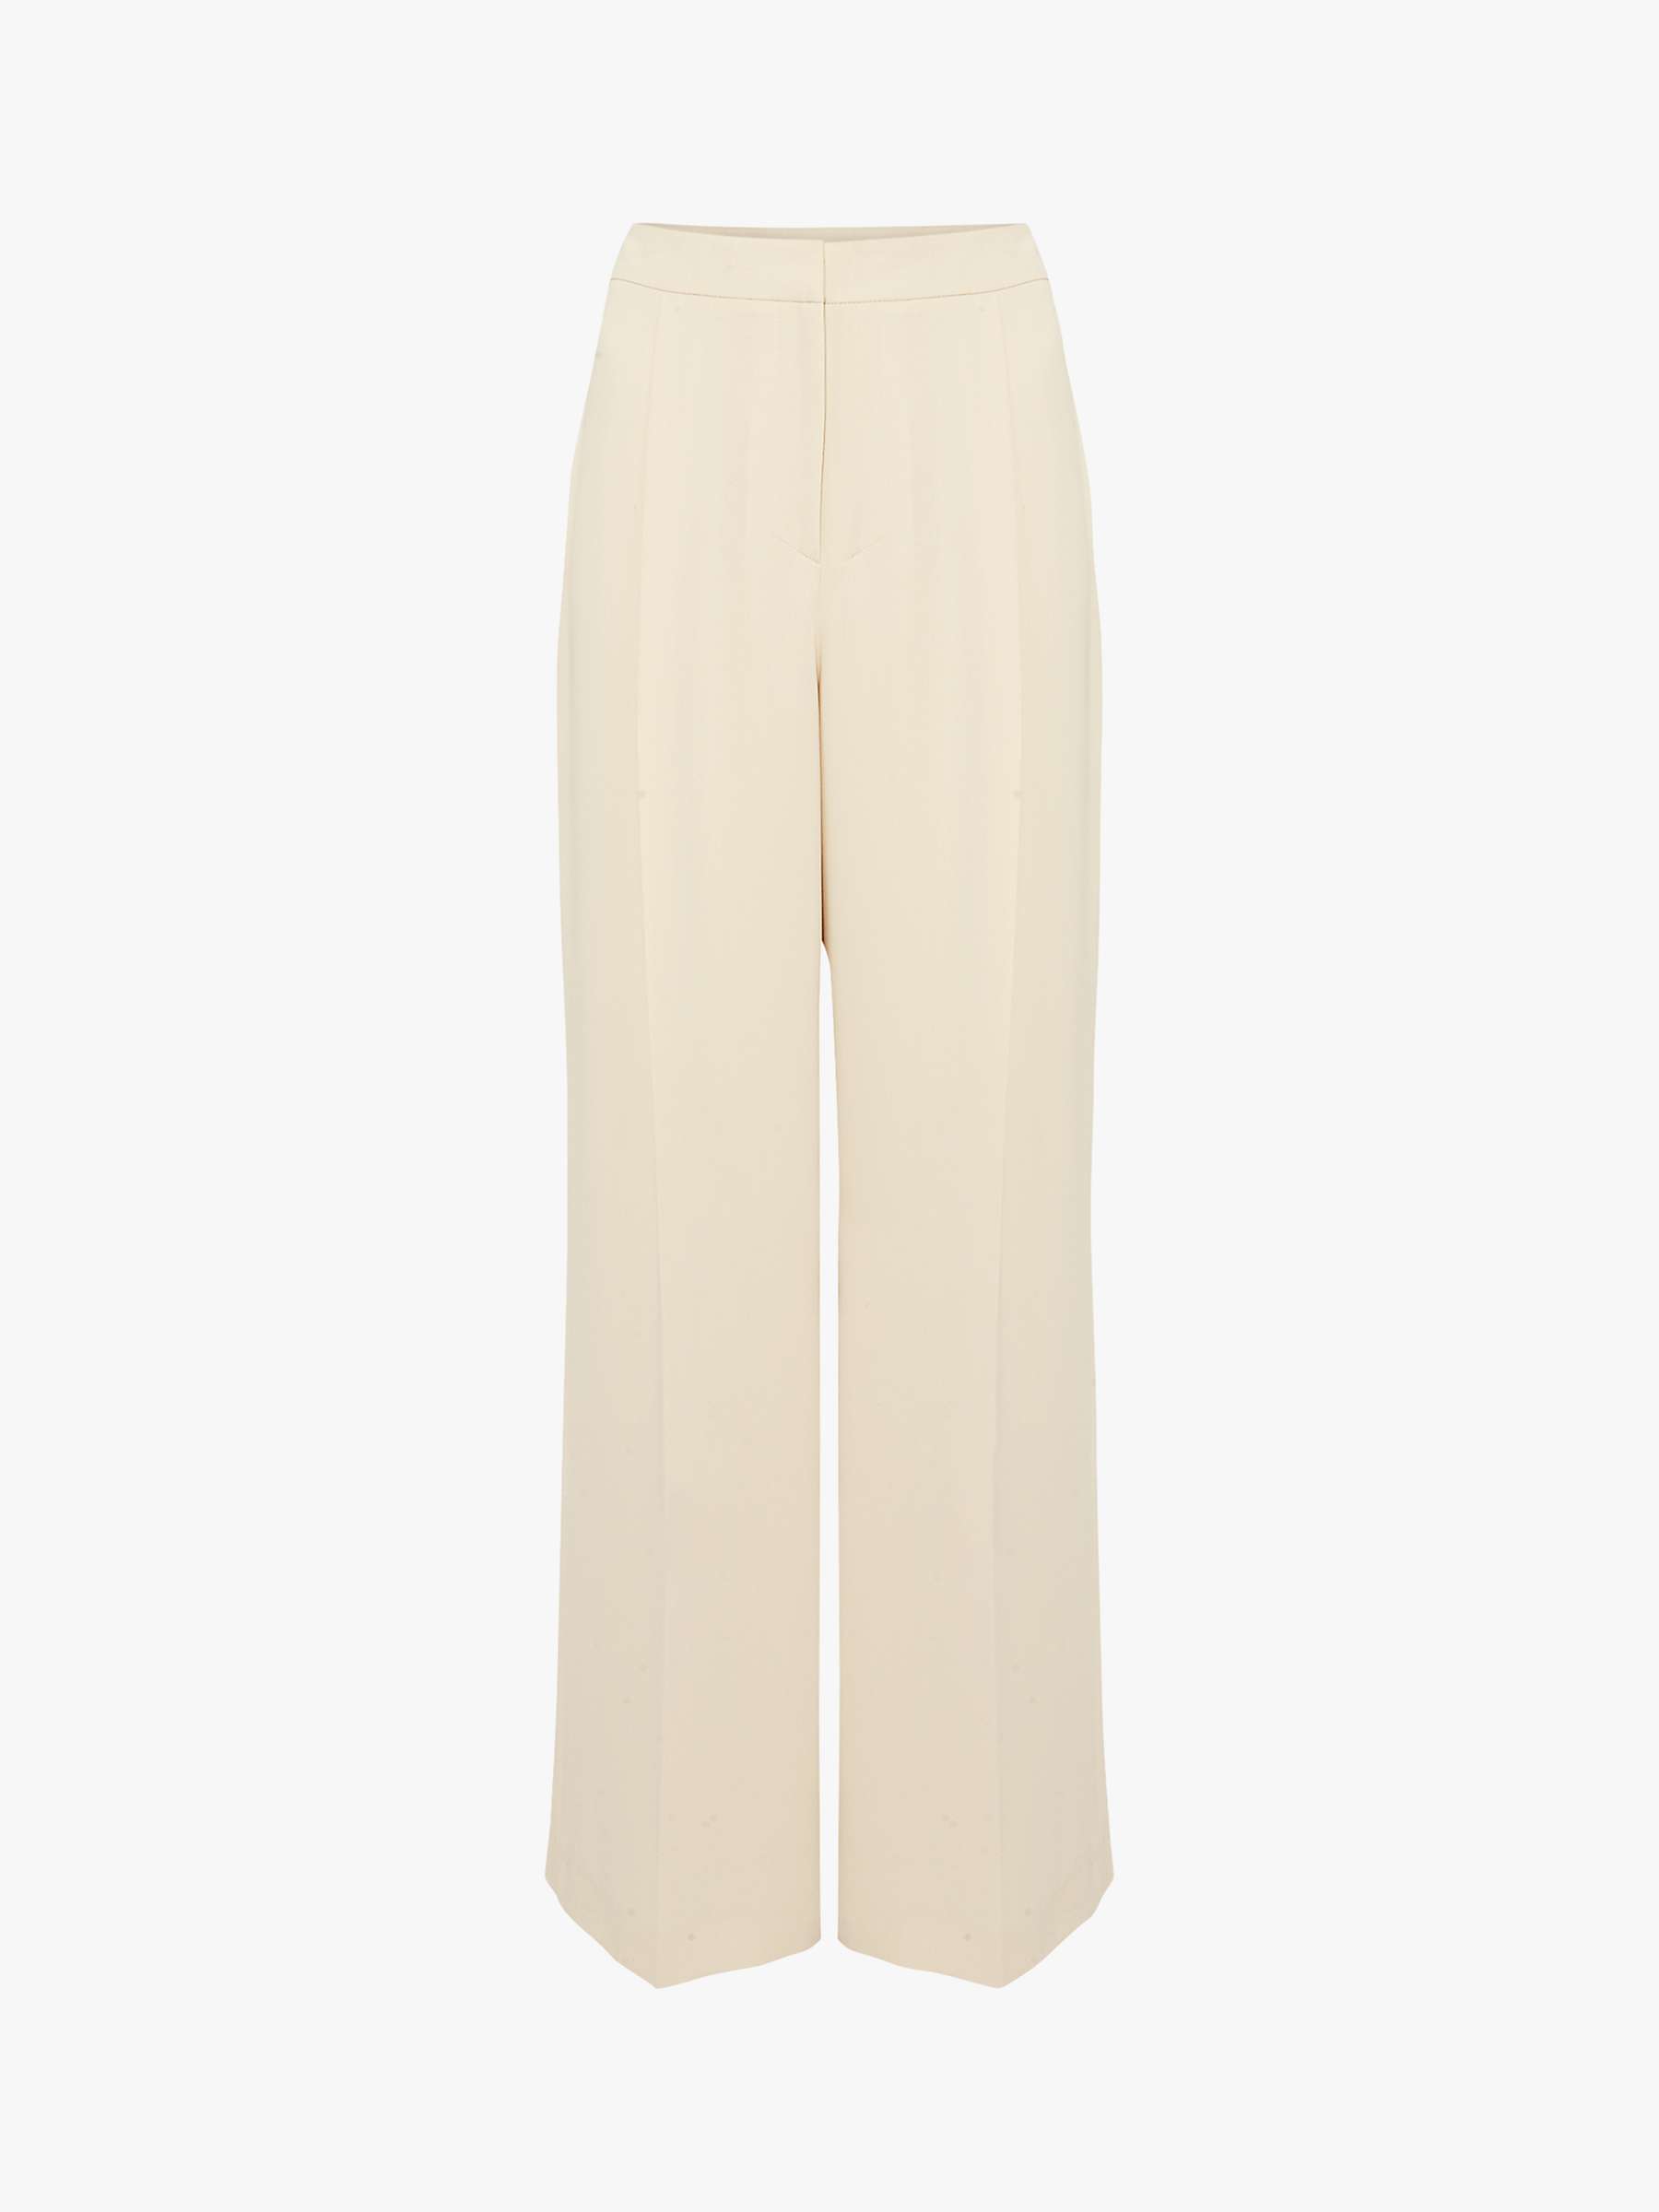 Buy Phase Eight Cadie Wide Leg Suit Trousers Online at johnlewis.com